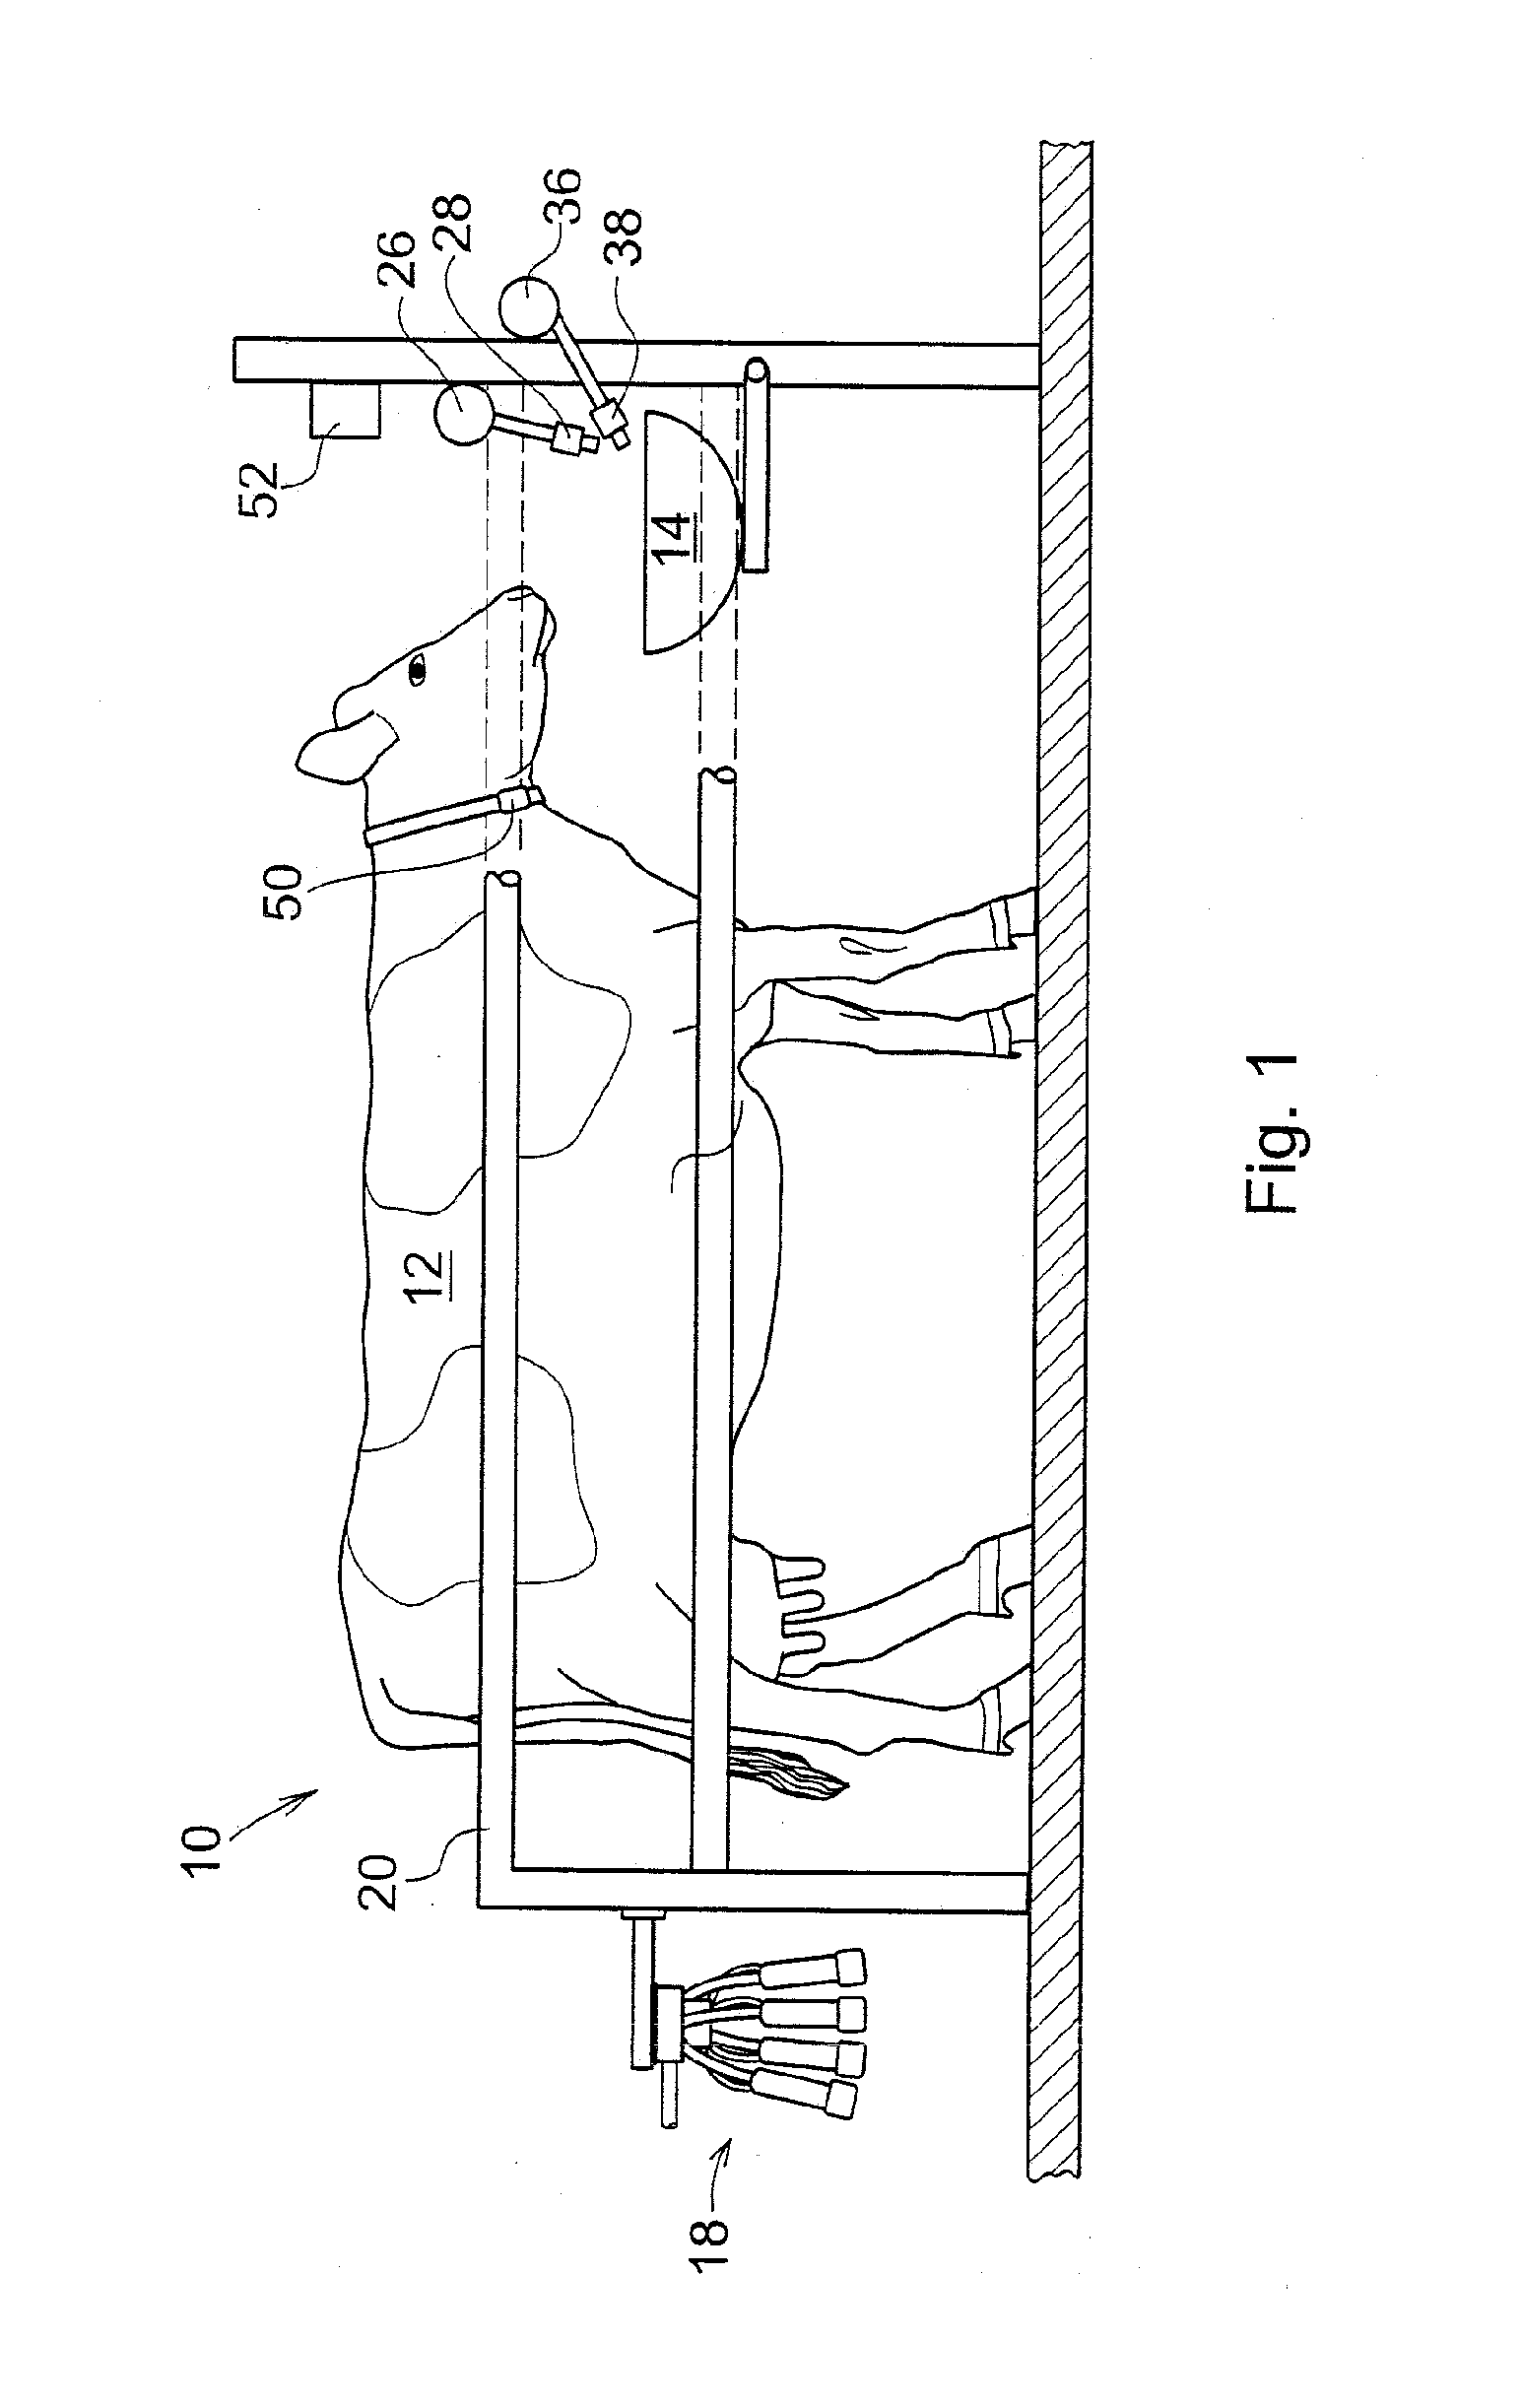 System for managing the supply of consumable matter to be consumed by milk producing animals